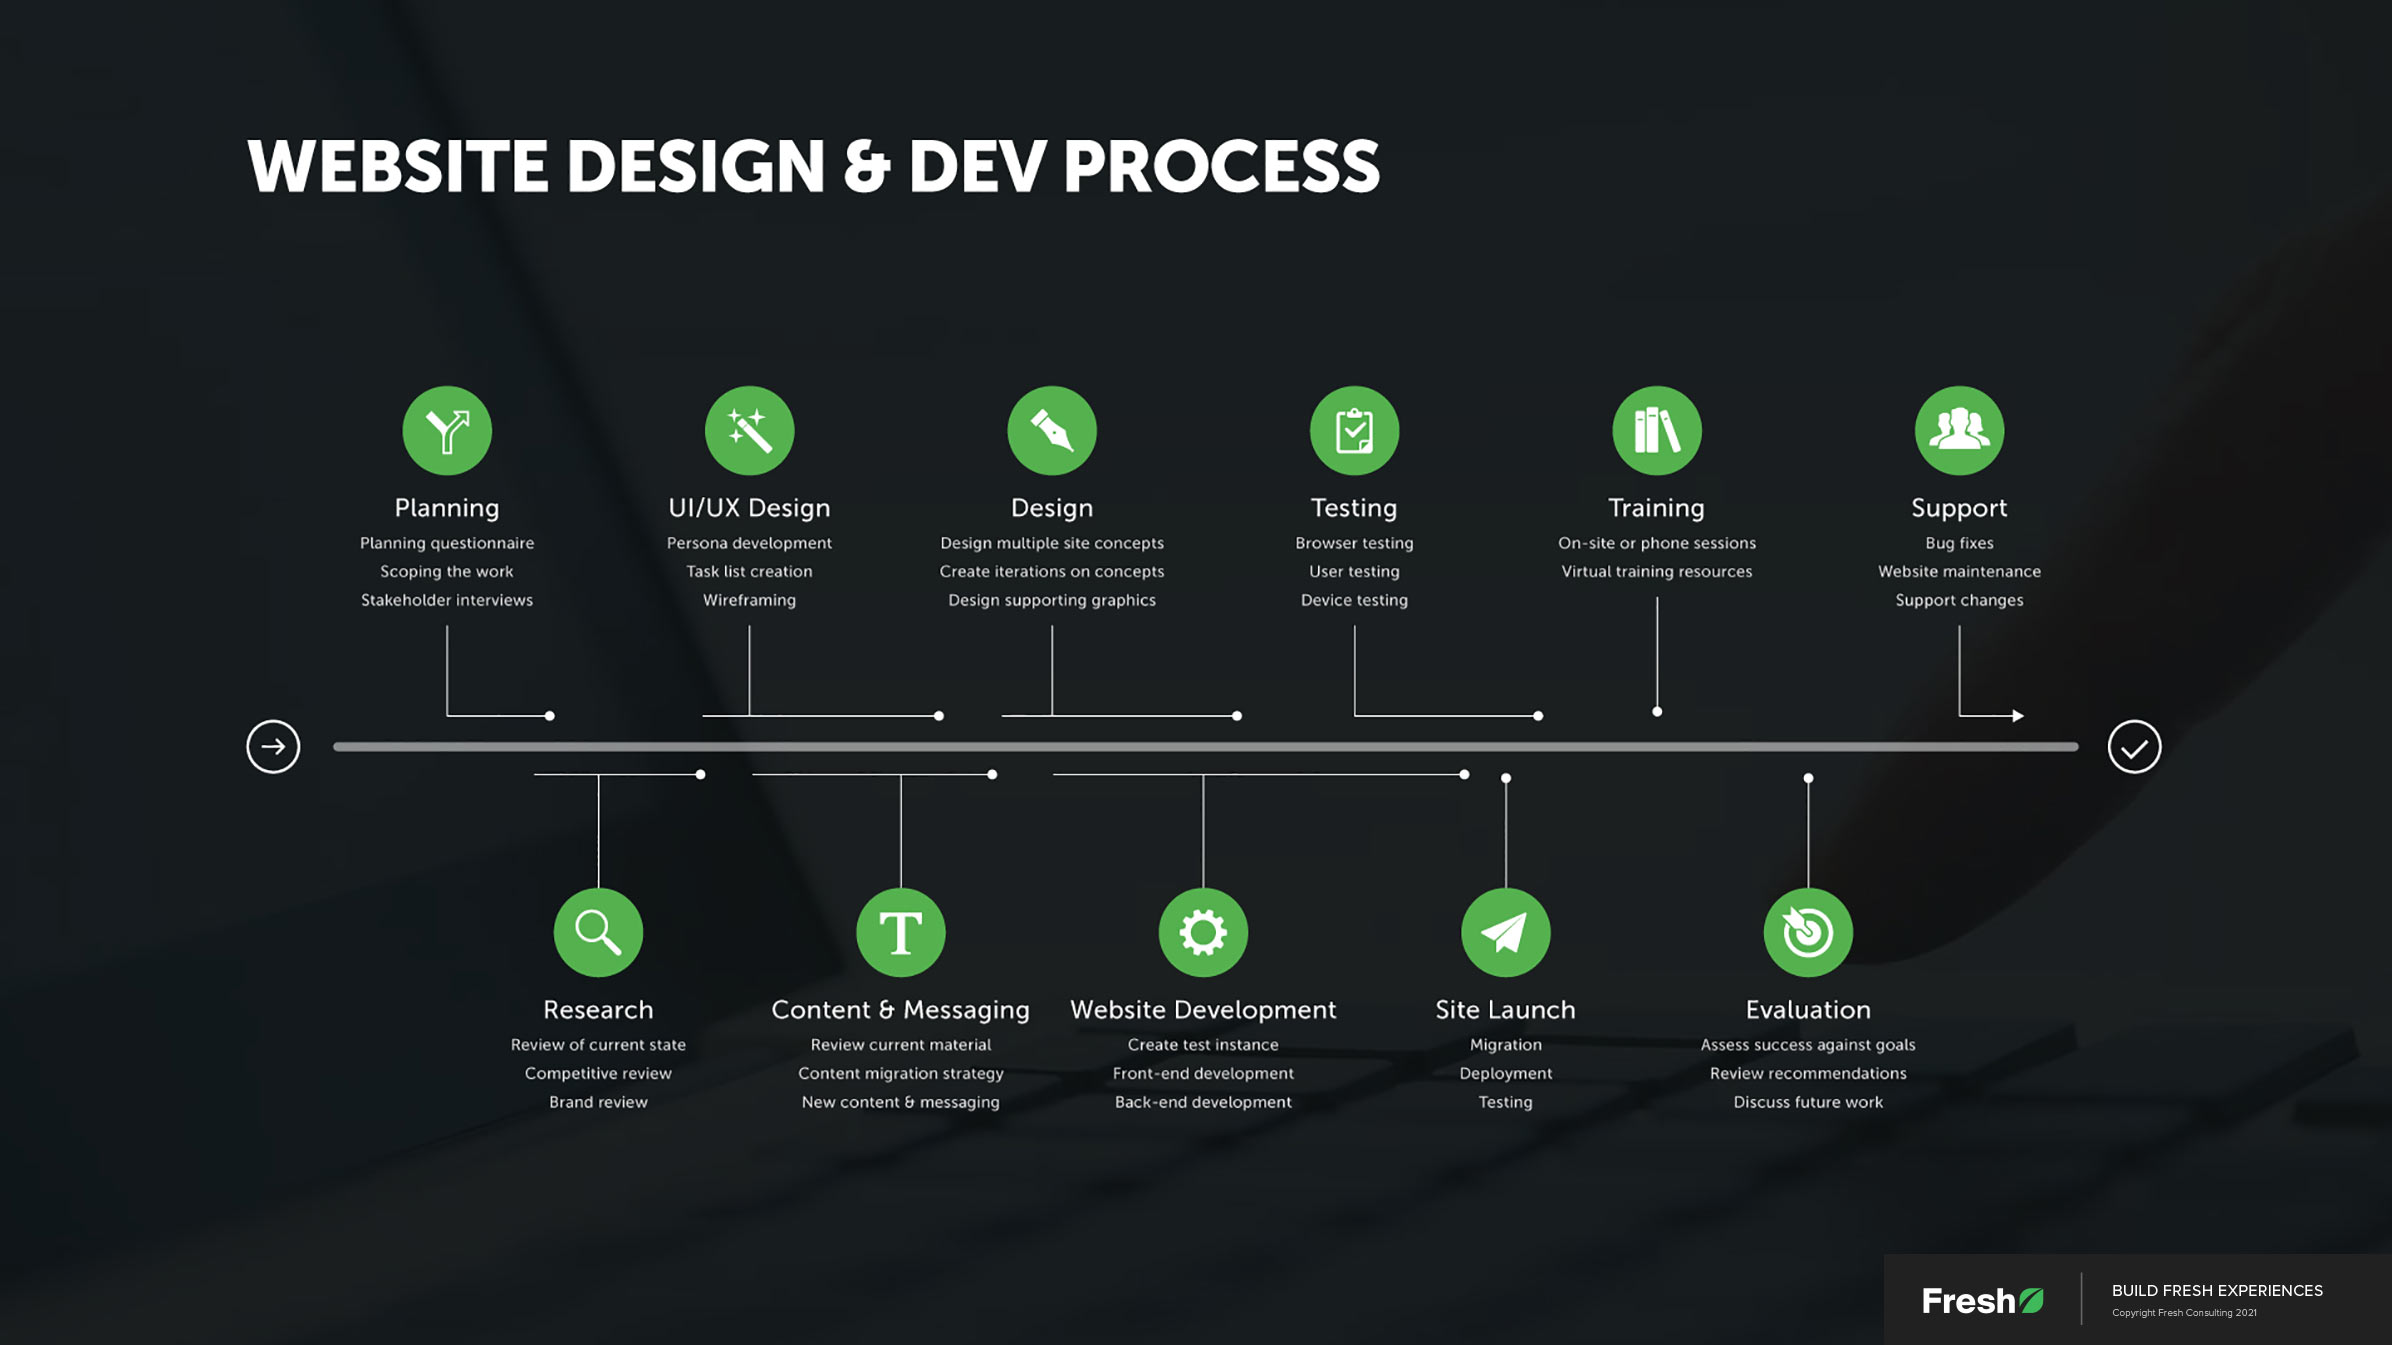 An image of our website design & development process at Fresh.